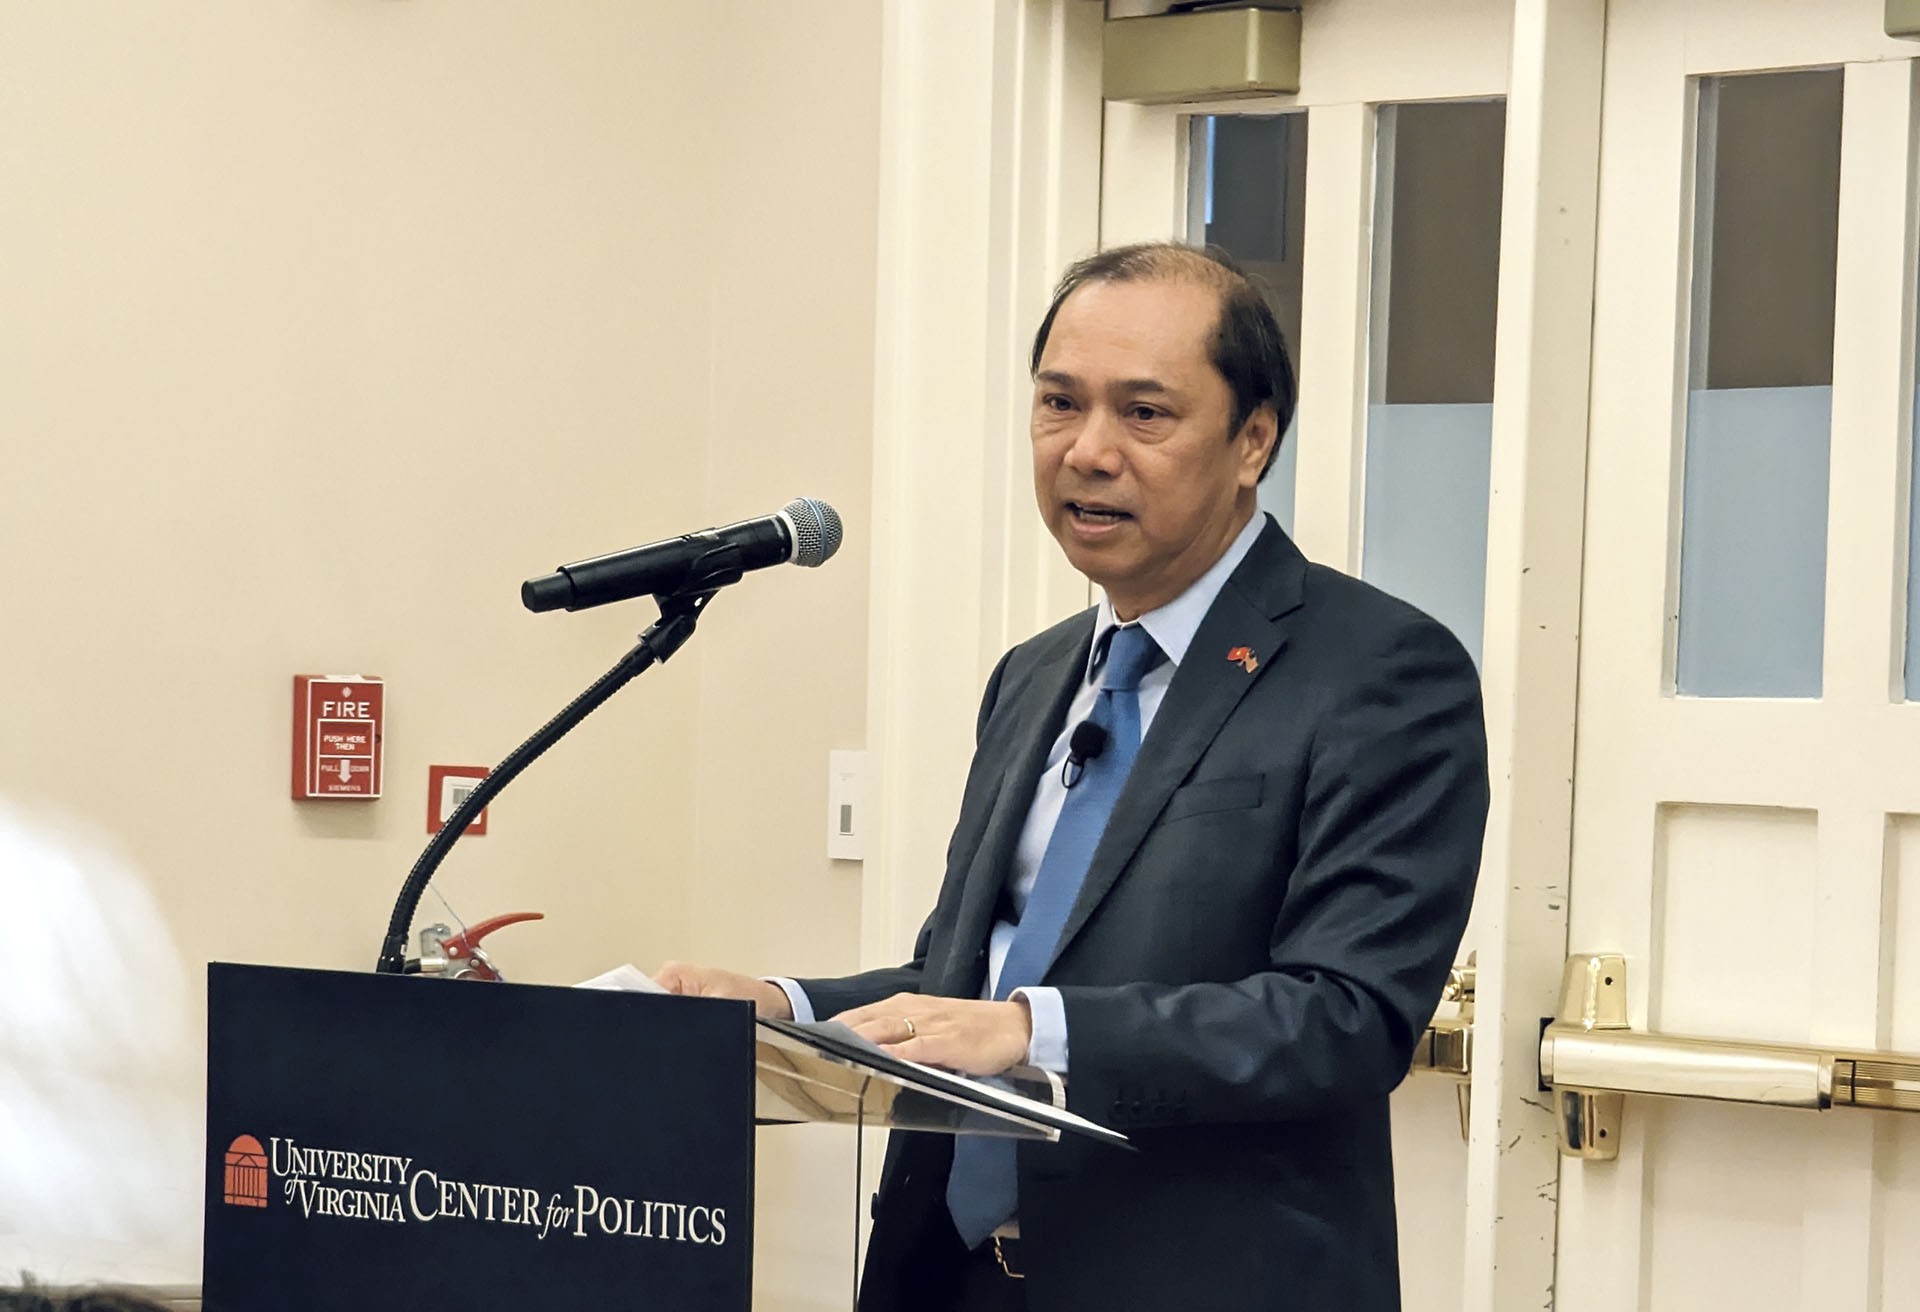 Ambassador talks to lecturers, students of University of Virginia